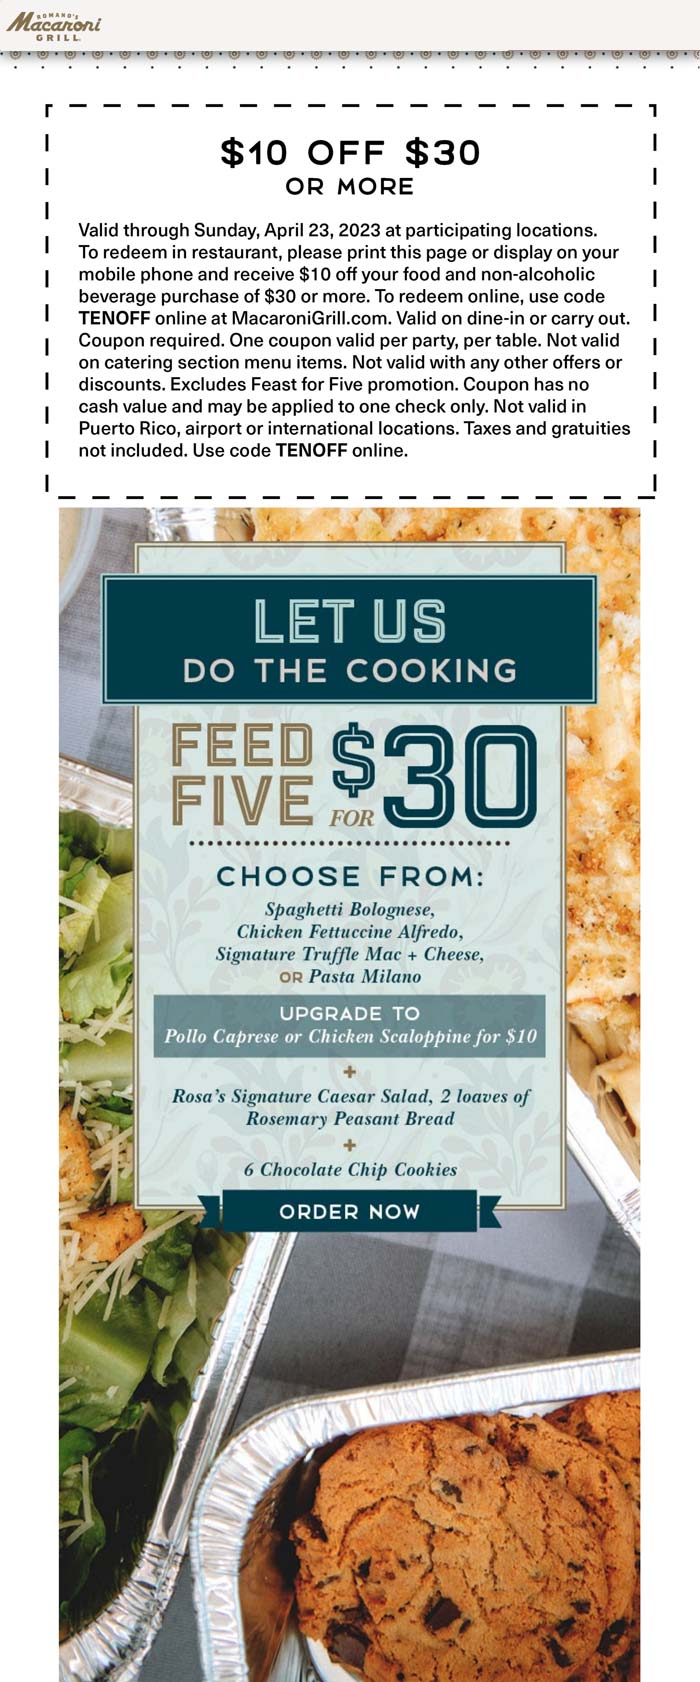 Macaroni Grill restaurants Coupon  Feed 5 for $30 & $10 off $30 today at Macaroni Grill restaurants #macaronigrill 